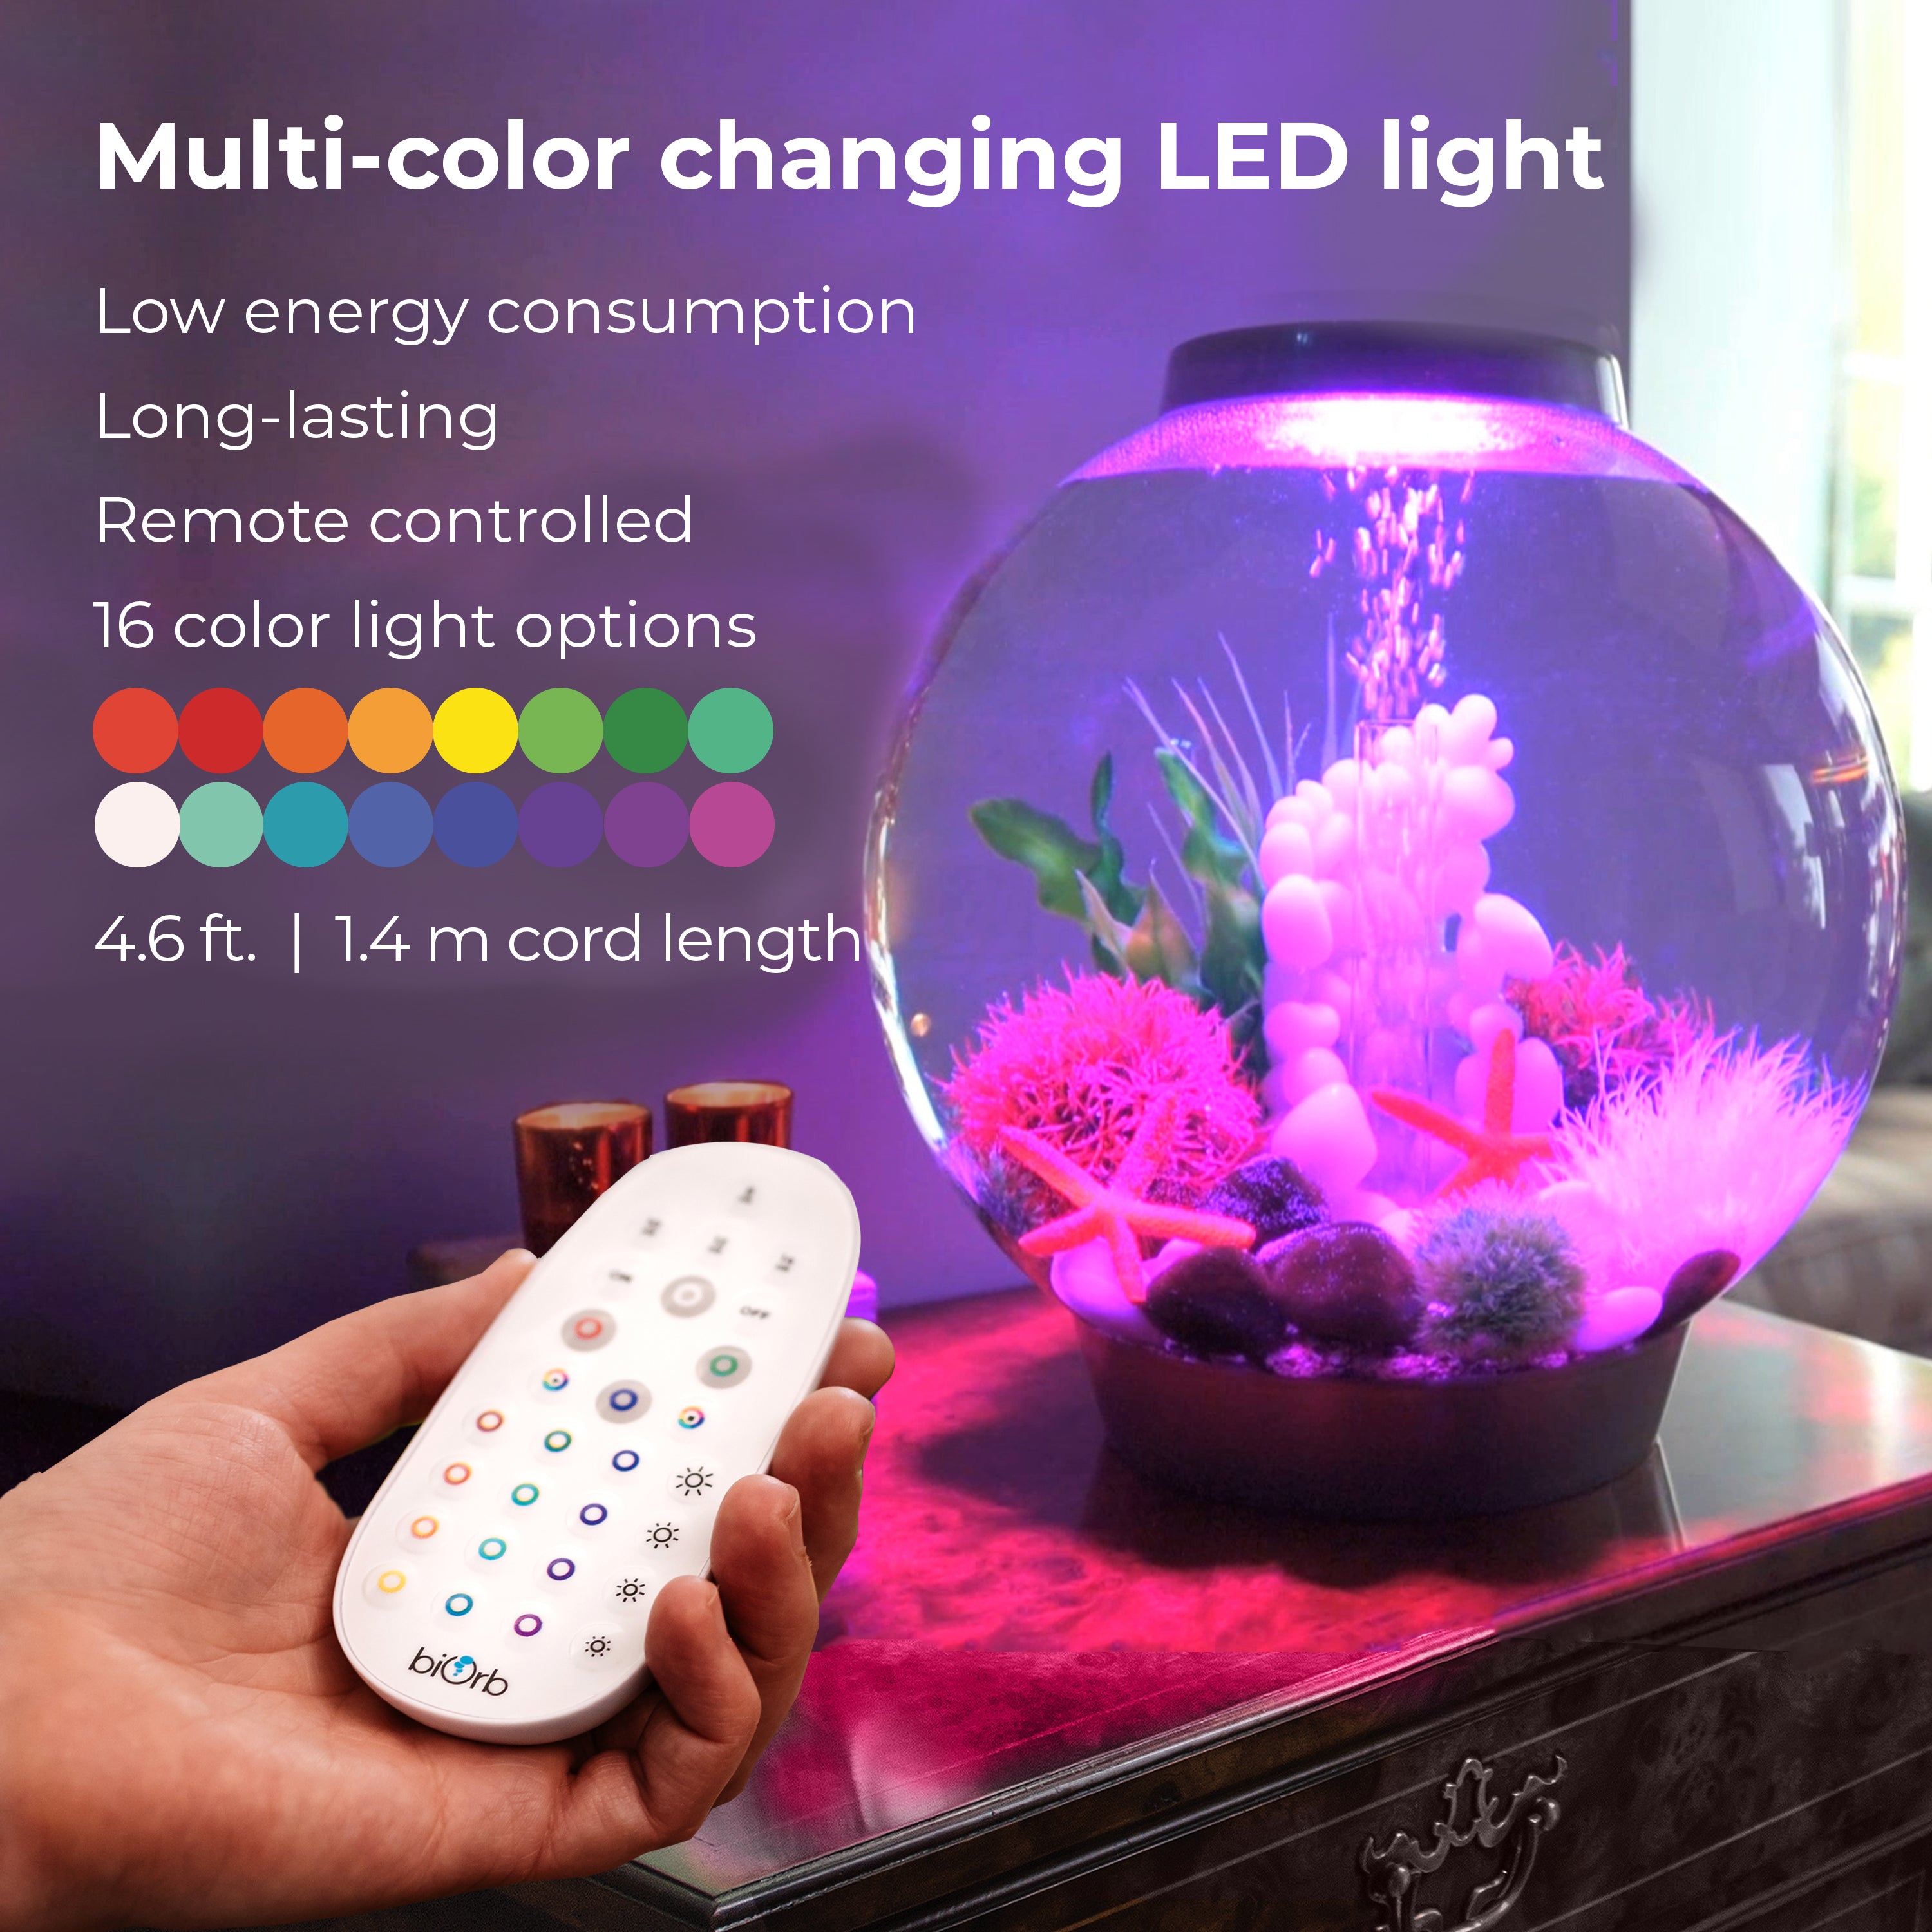 CLASSIC 30 Aquarium with MCR Light - 8 gallon features Multi-color changing LED lights